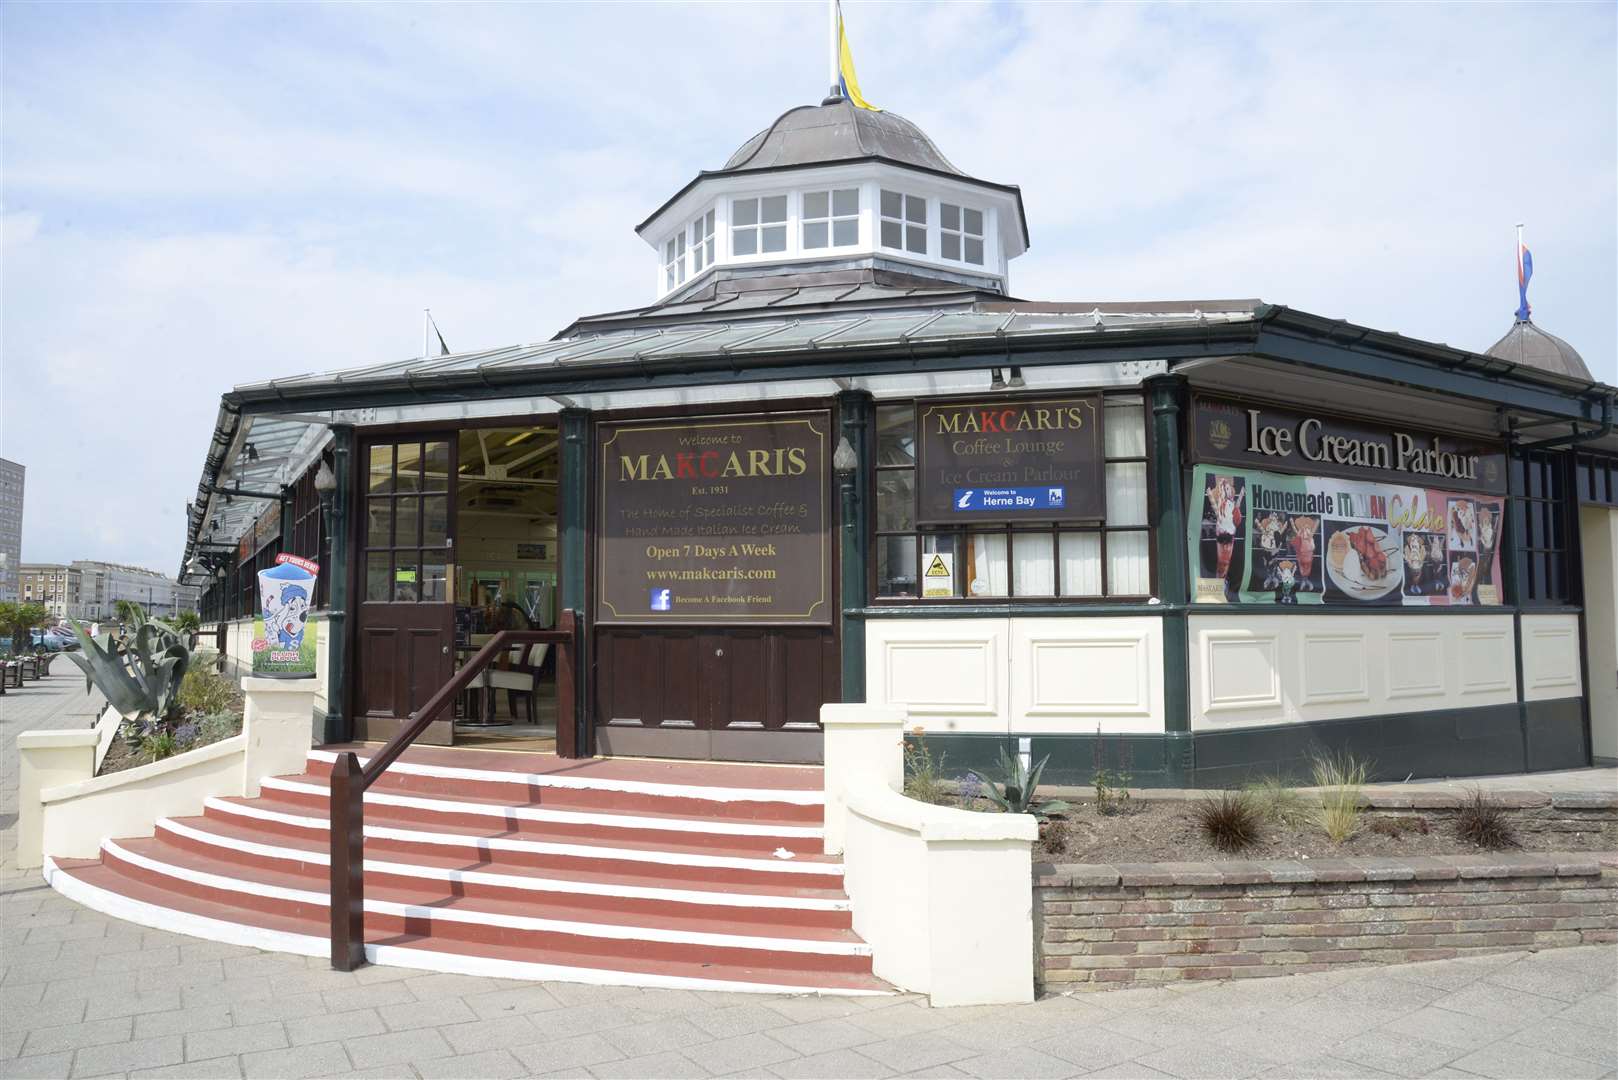 Improvements are planned for the central bandstand